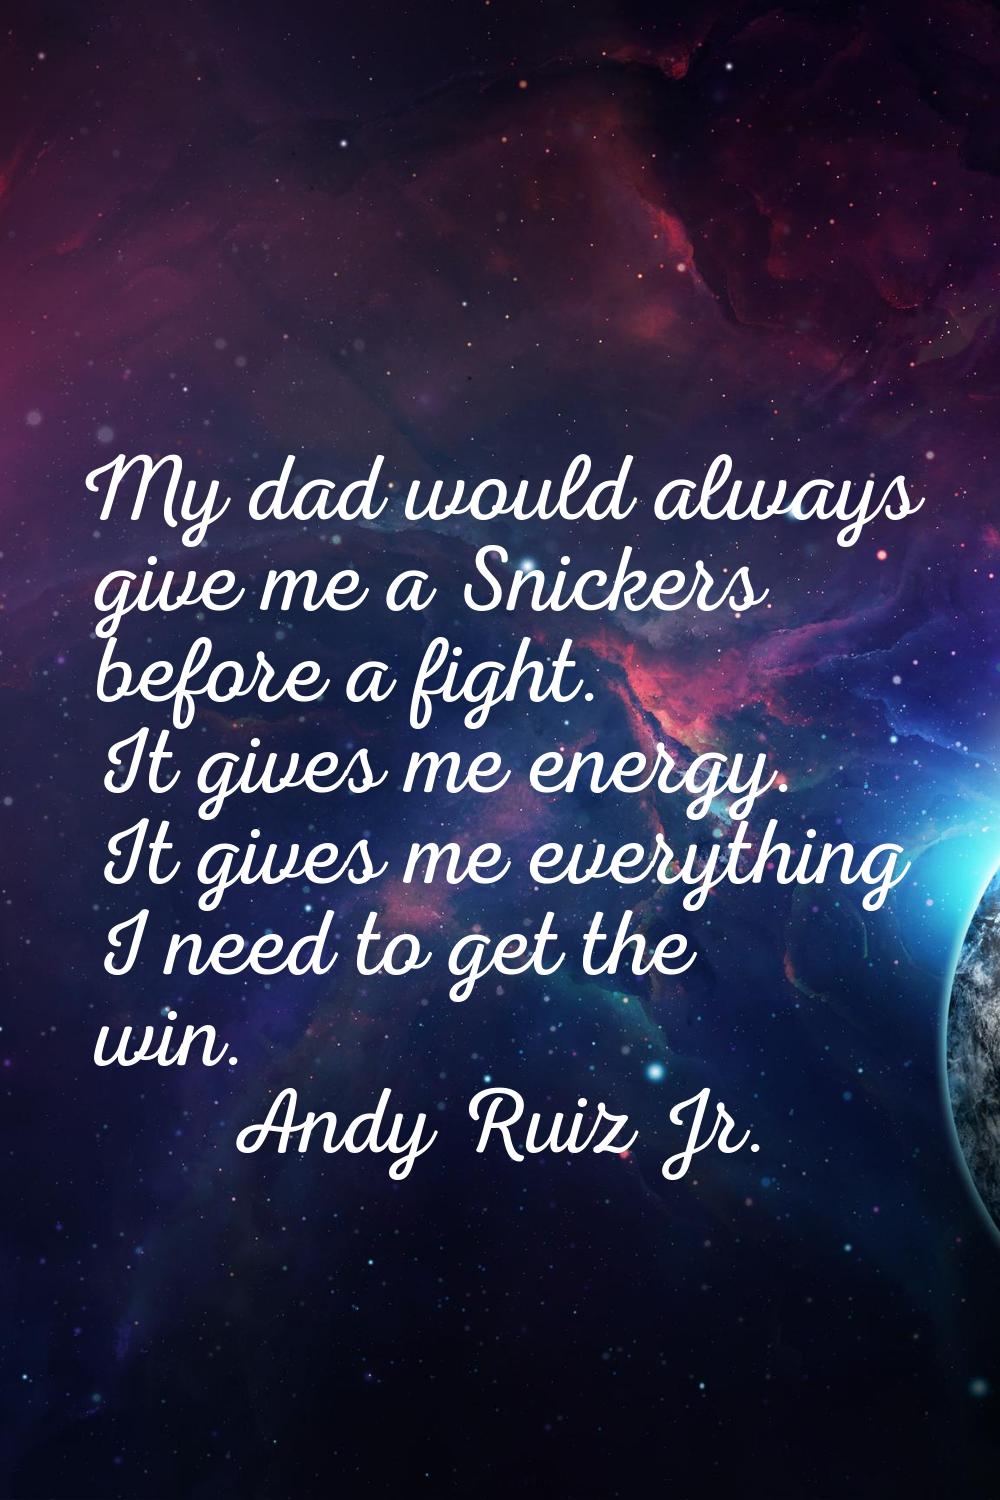 My dad would always give me a Snickers before a fight. It gives me energy. It gives me everything I